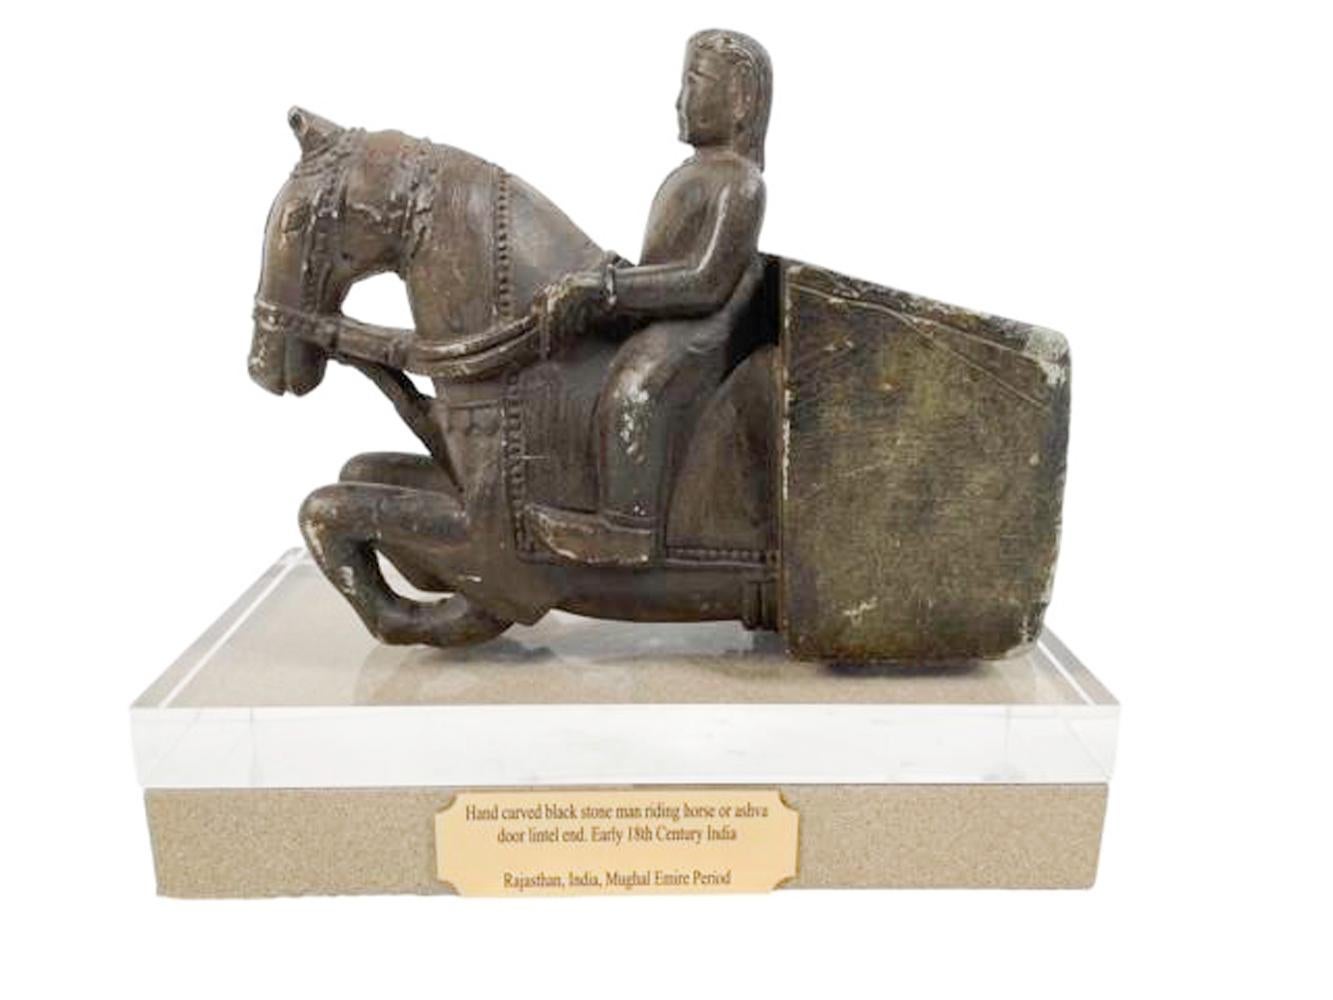 Carved stone architectural element depicting a uniformed rider on horseback in a formal pose. Carved from a single block the full round carving includes the horse from just behind the rider forward with it's neck bowed and front legs bent back to